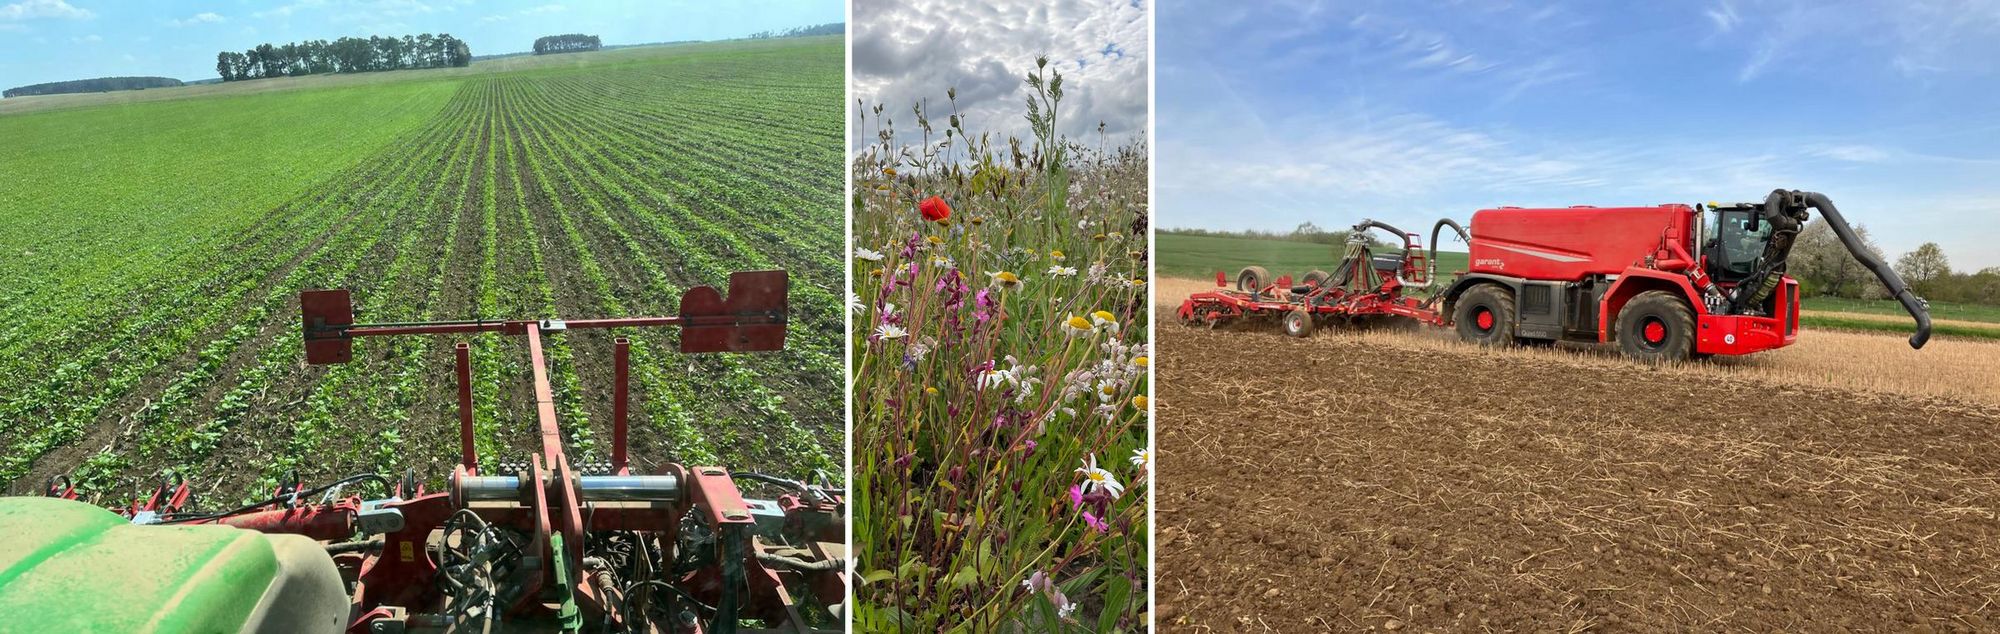 Collage von 3 photos: the attached hoe in the inter-rows of corn, blooming fallow land with a variety of wild flowers and grasses in an agricultural landscape, a slurry tanker with a cultivator for direct cultivation into the soil on a stubble field